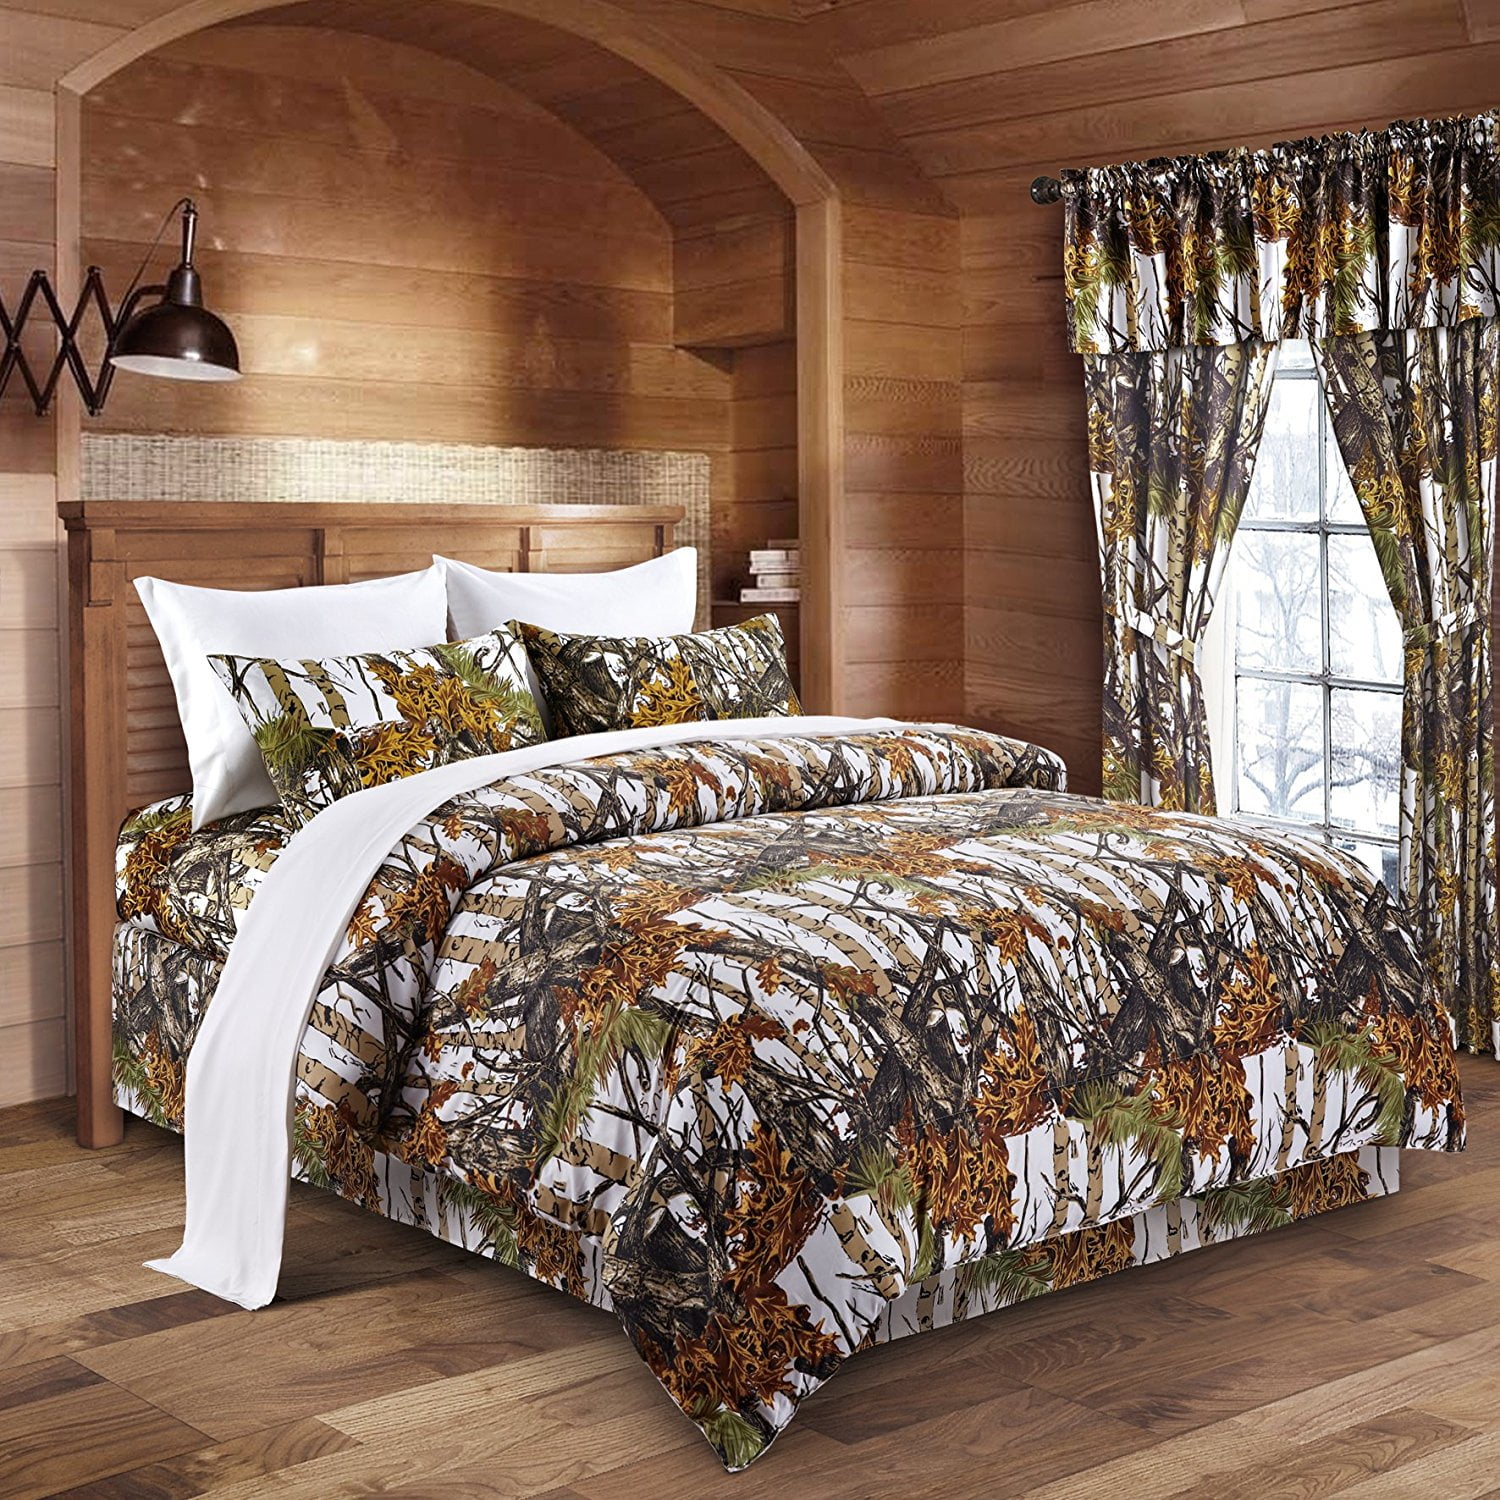 COMFORTER SHEET CURTAIN CAMOUFLAGE BEDDING NEW 22 PC BLACK CAMO QUEEN SIZE SET! 